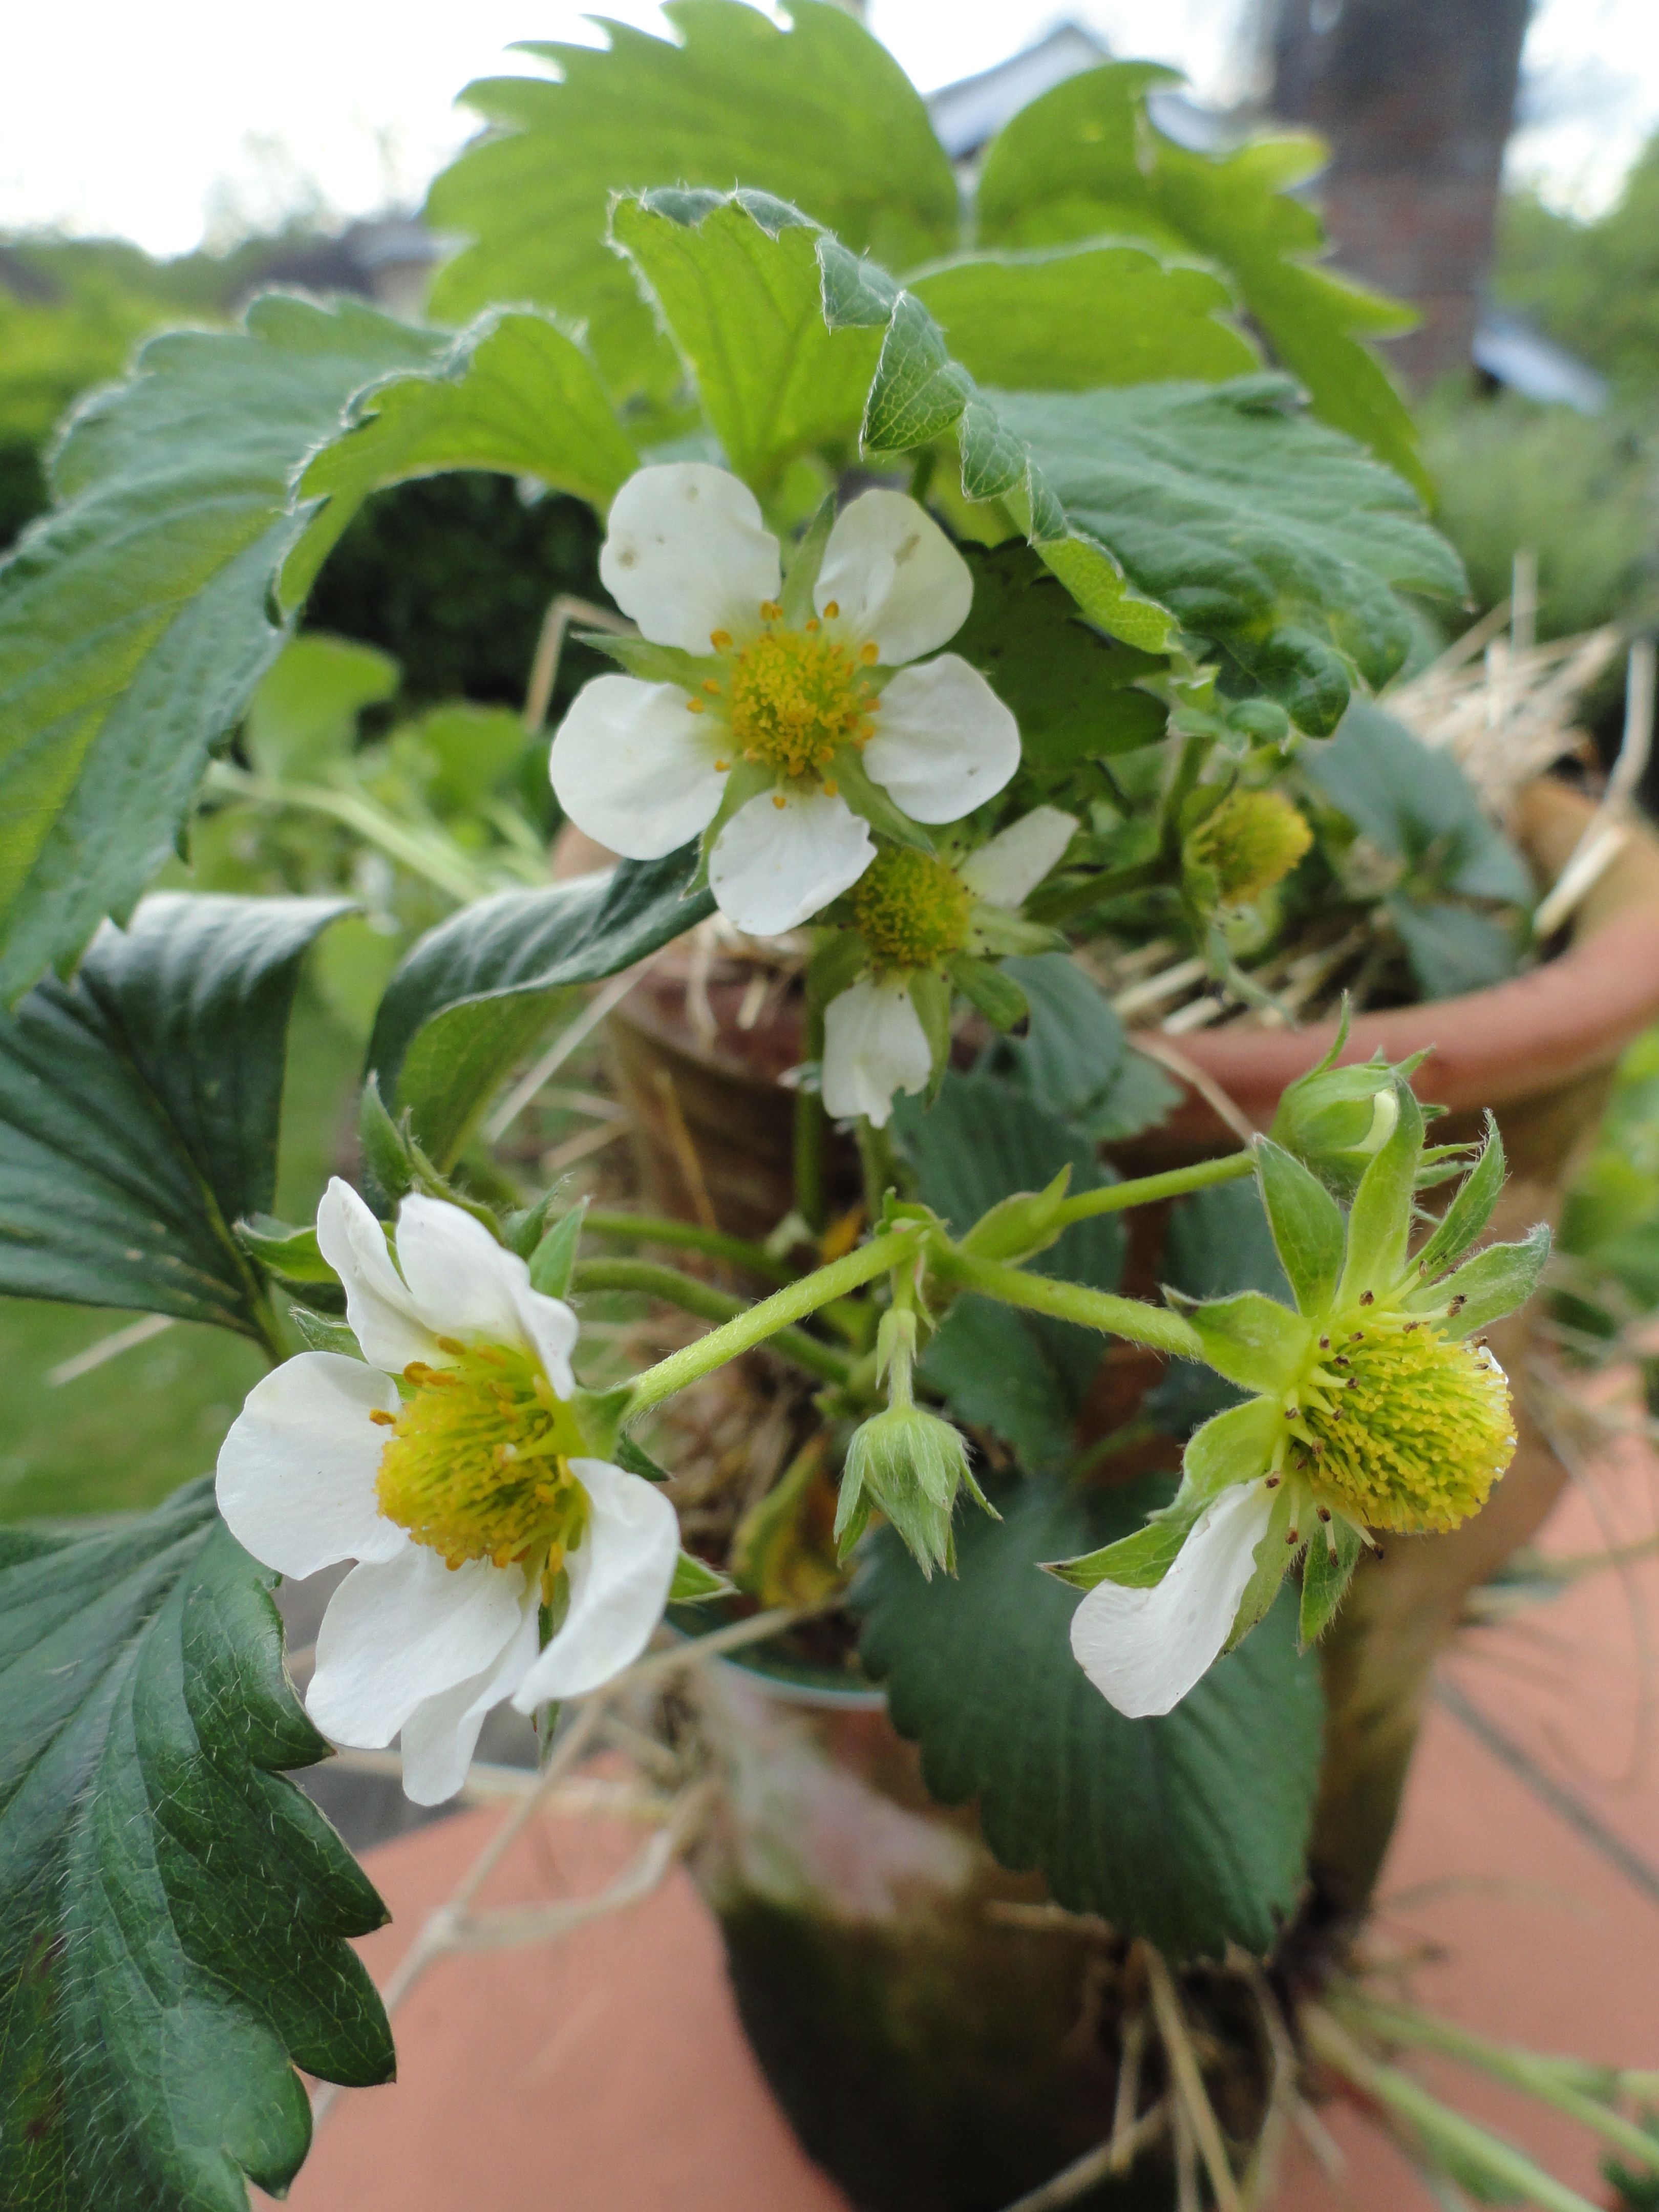 Strawberry plants in blossom